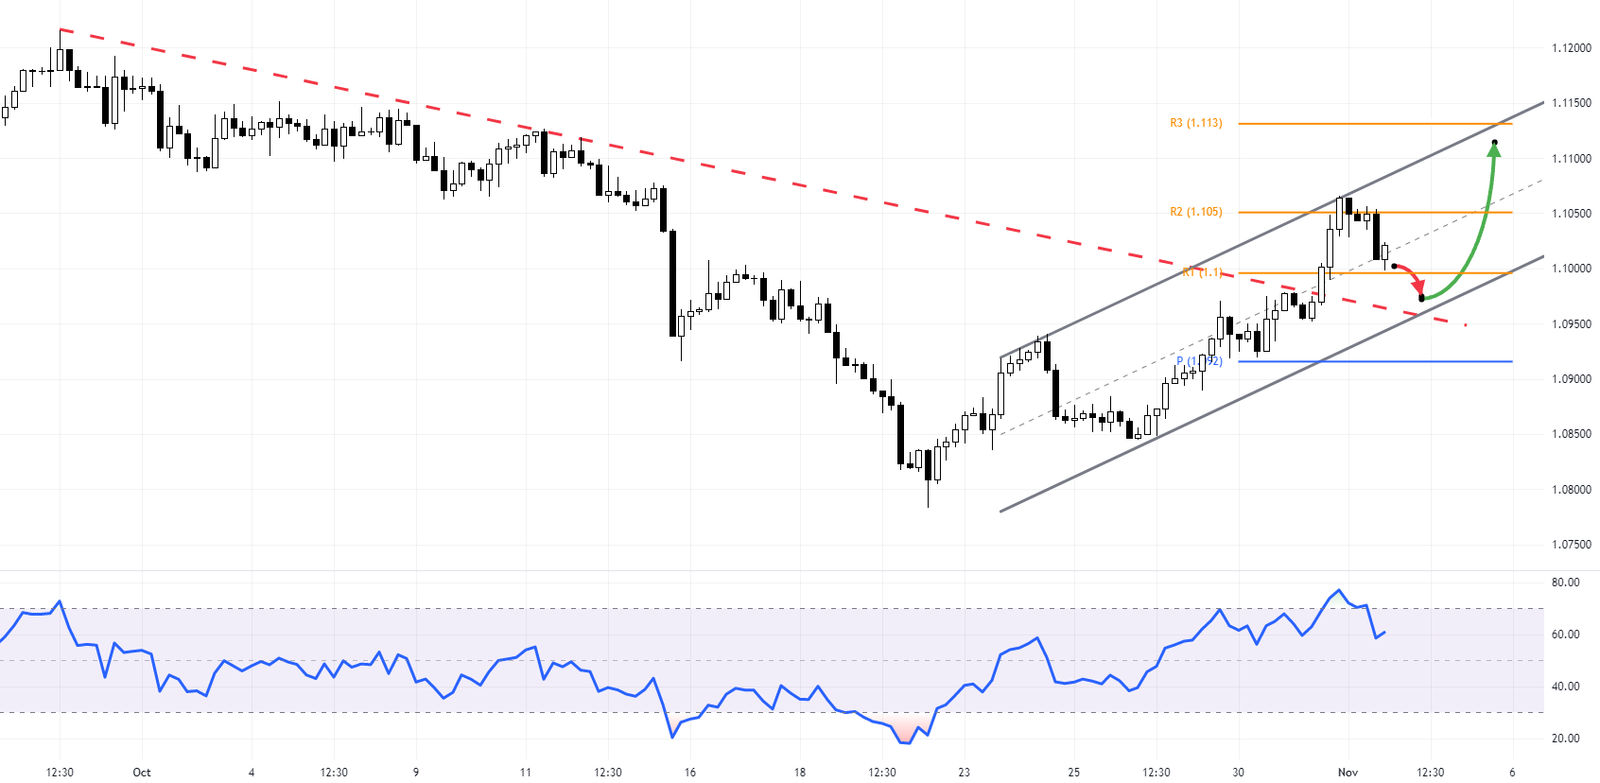 GBPCHF Forecast - Navigating the Bearish Channel